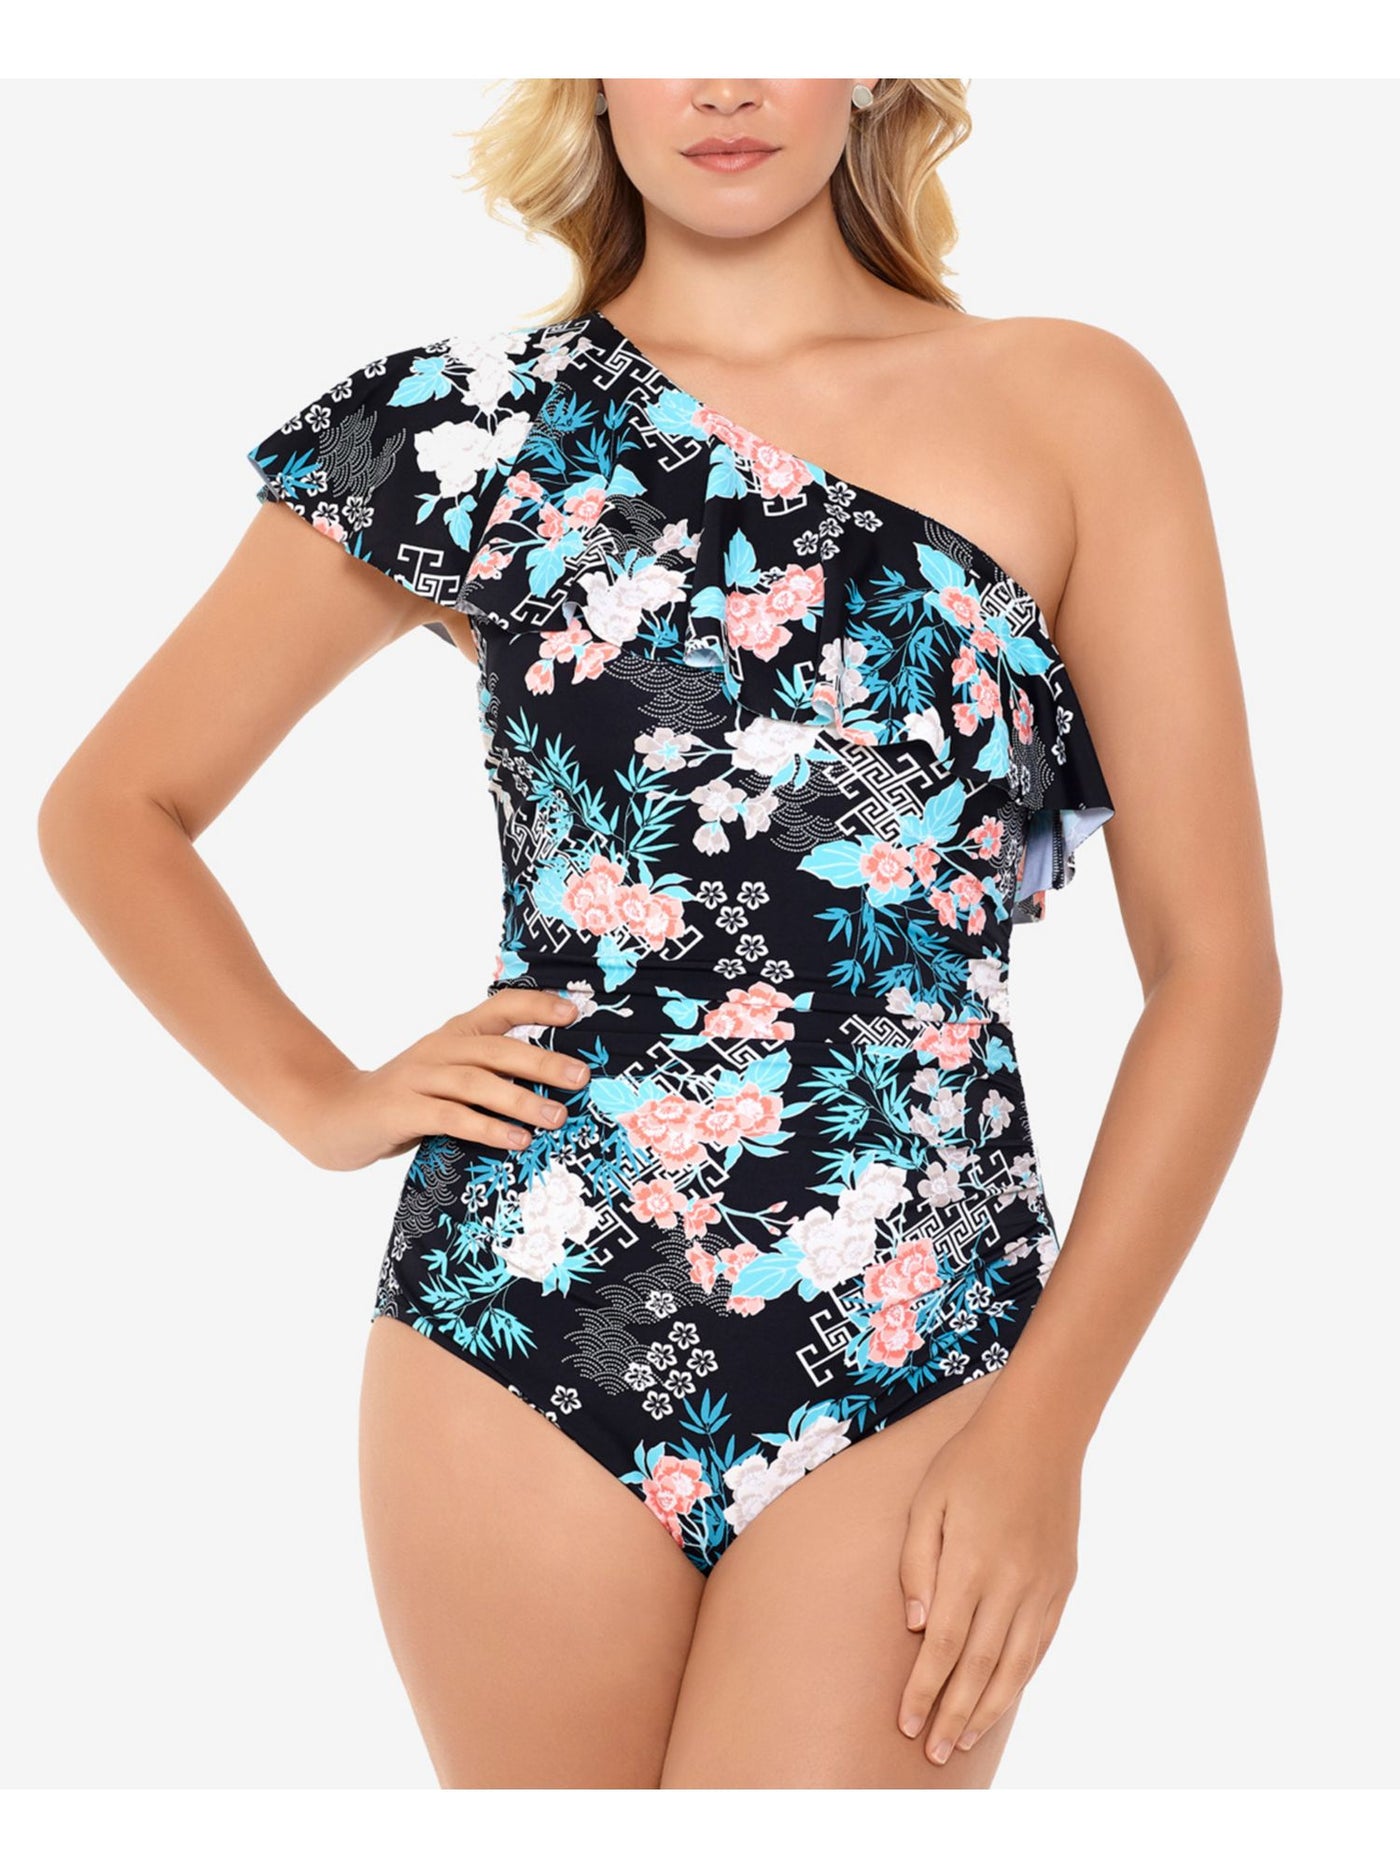 SWIM SOLUTIONS Women's Black Tropical Print Stretch Allover Slimming Fixed Cups Full Coverage Ruffled One Shoulder One Piece Swimsuit 18